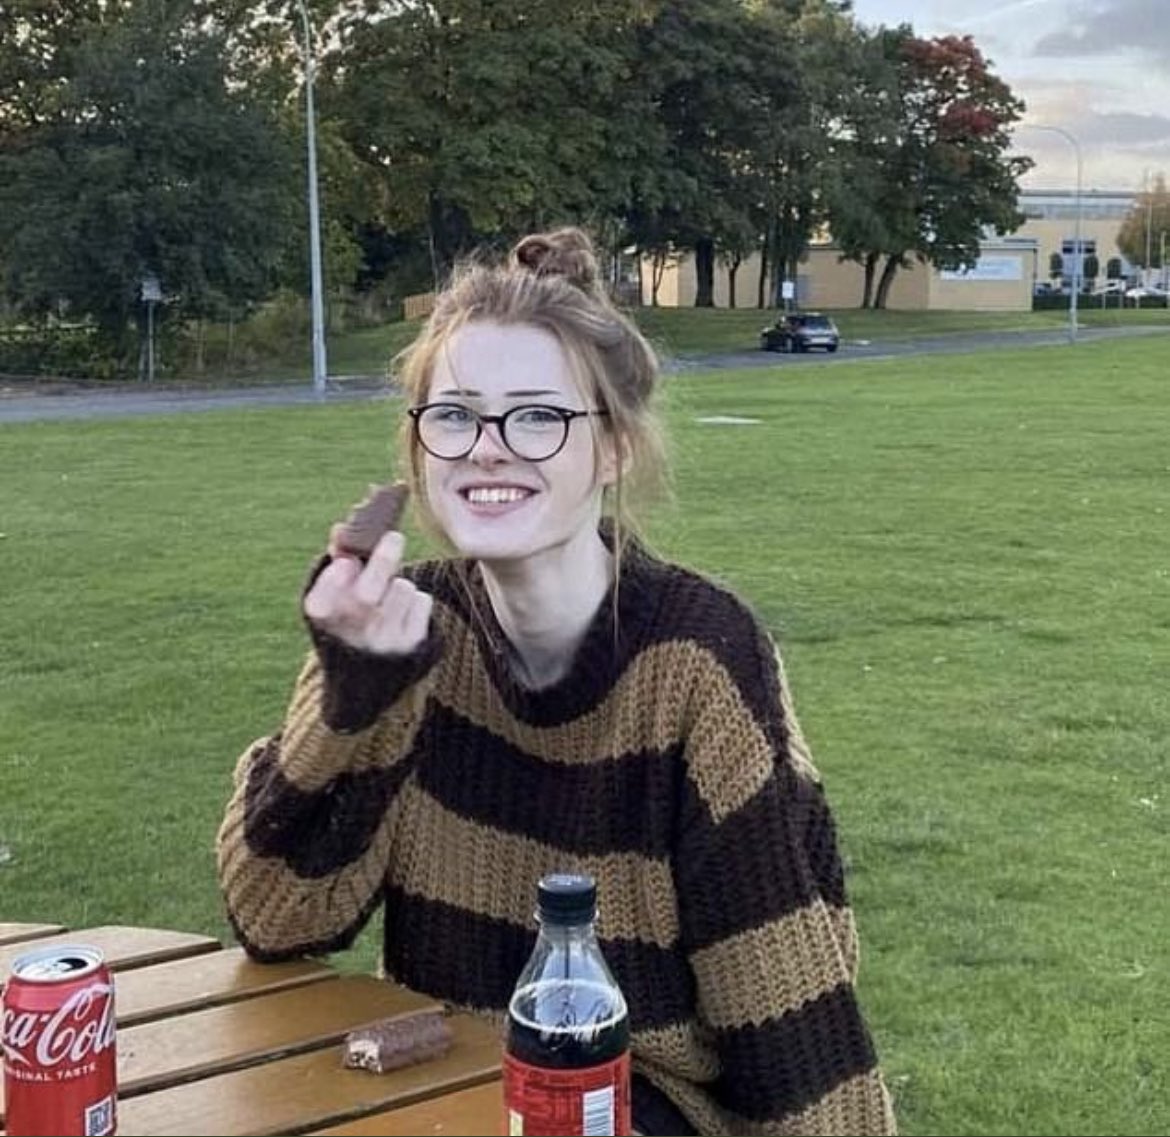 Brianna Ghey, only 16, yet so brave. So brave that she lived her life authentically in the face of rampant transphobia. She had more courage than all the TERFs put together. She might be gone & there’s another large hole in our community, but her light will continue to shine 🏳️‍⚧️❤️